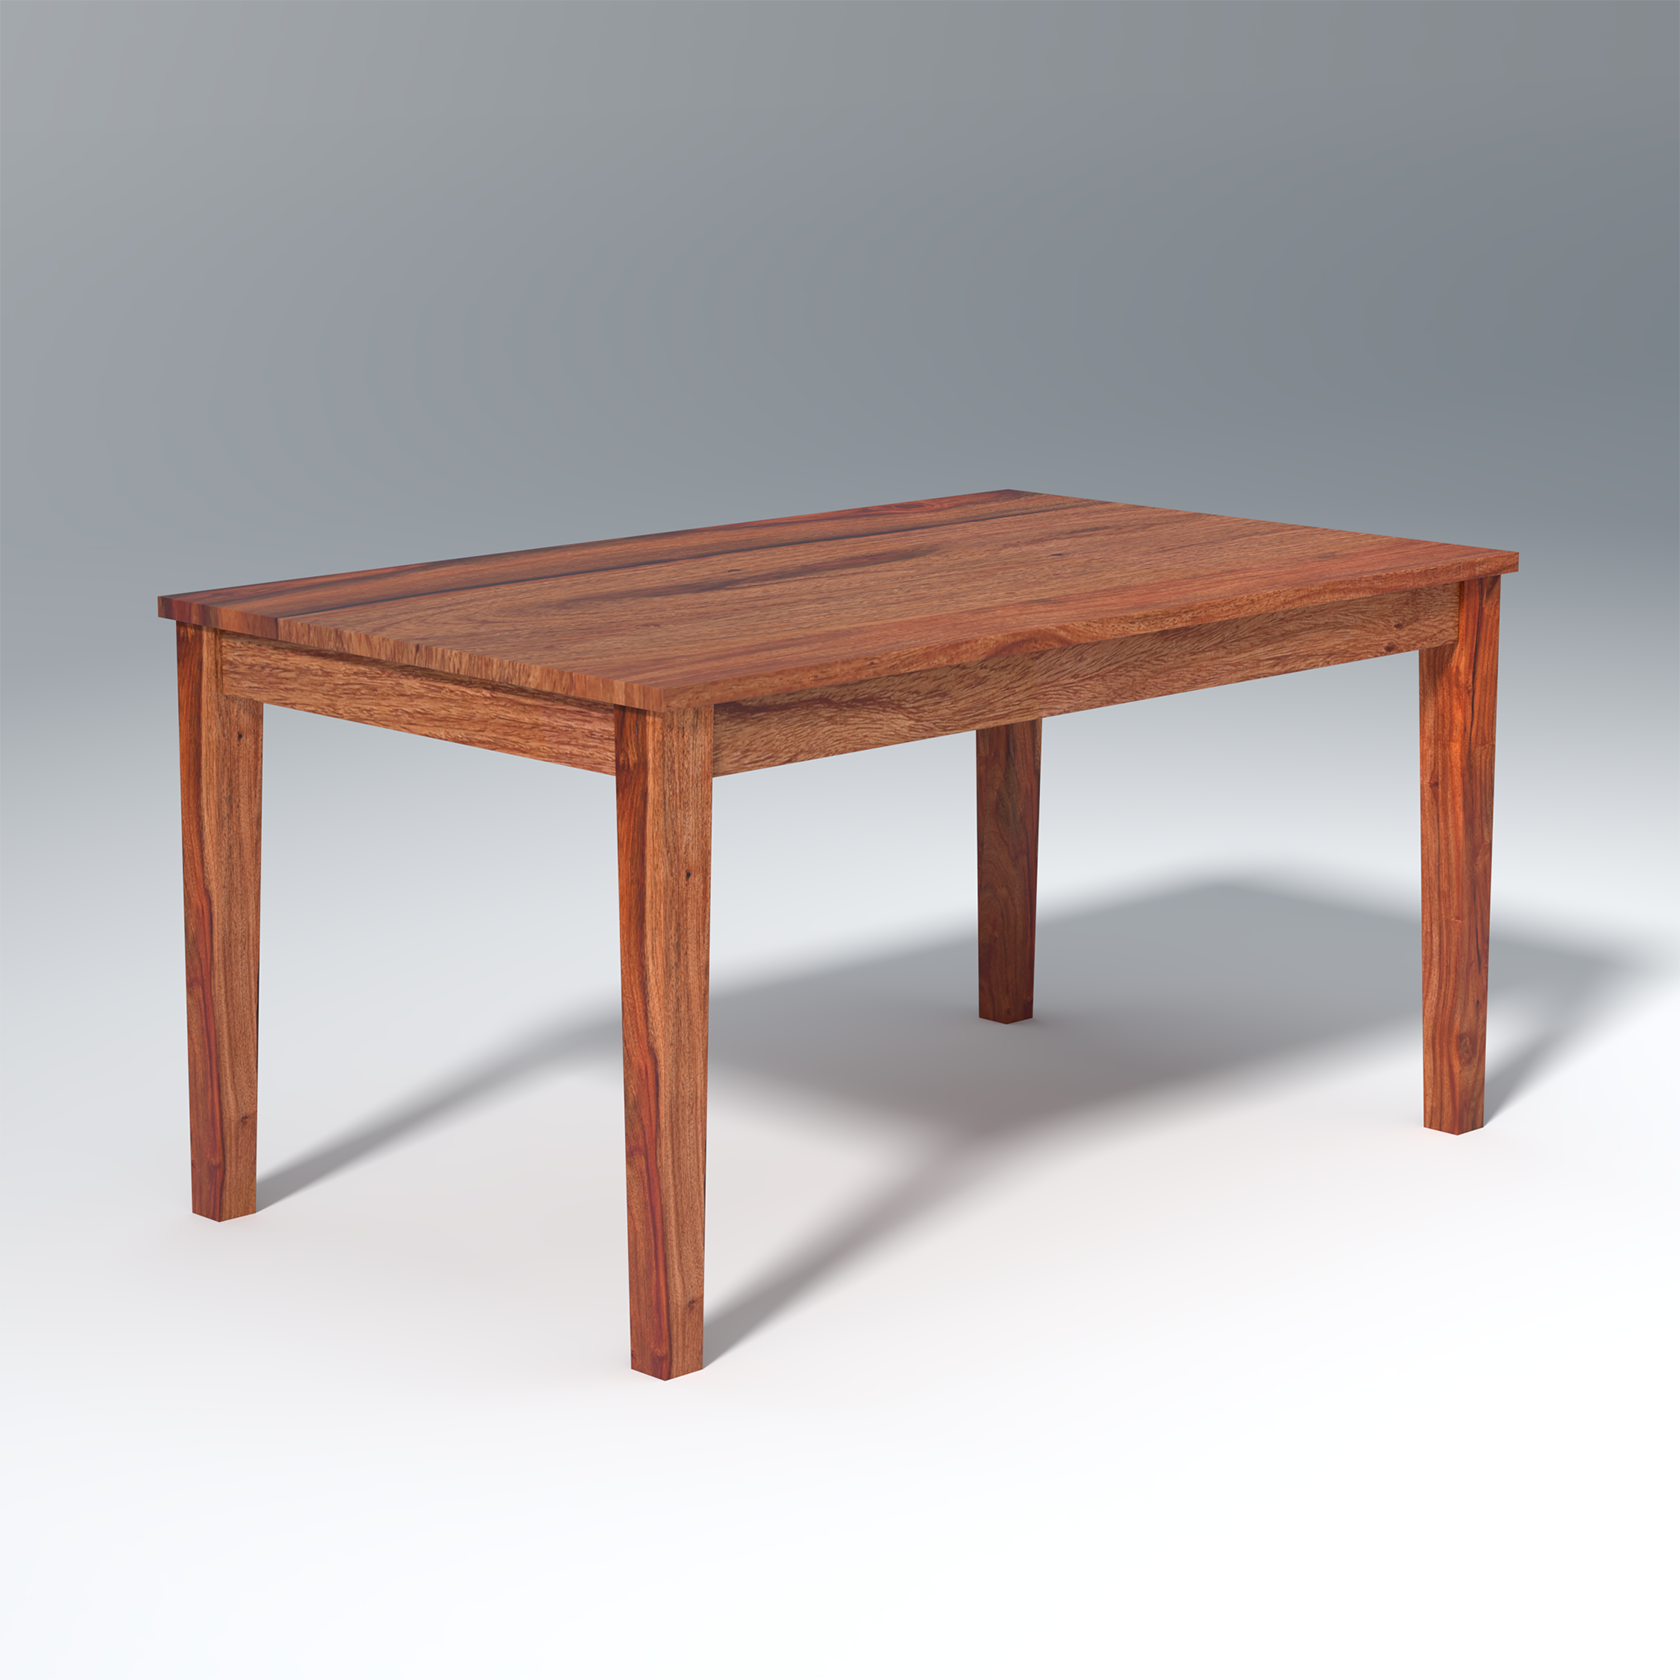 Velour Sheesham wood dining table In Reddish color with 6 Seating